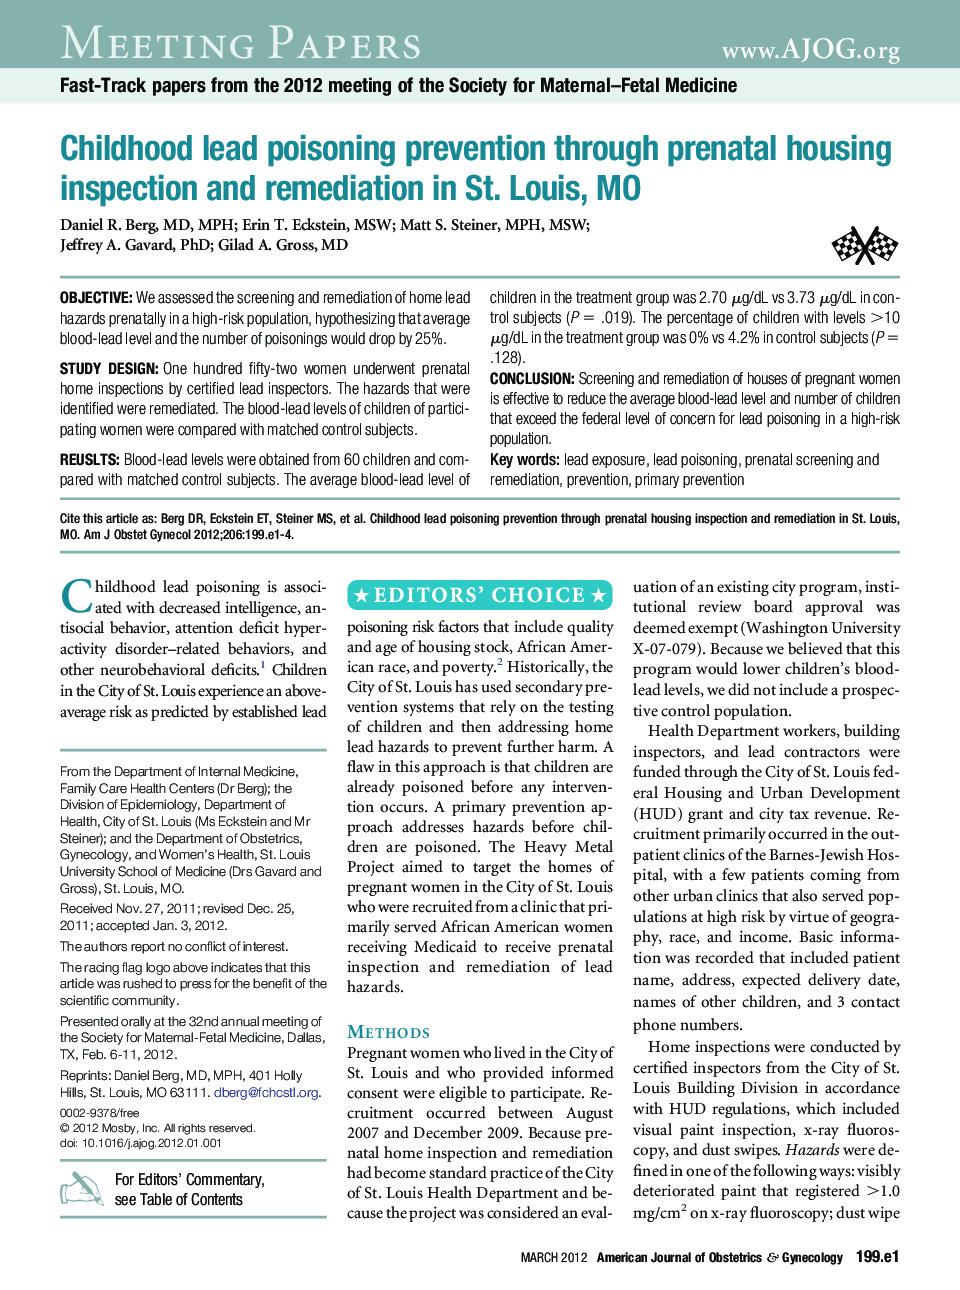 Childhood lead poisoning prevention through prenatal housing inspection and remediation in St. Louis, MO